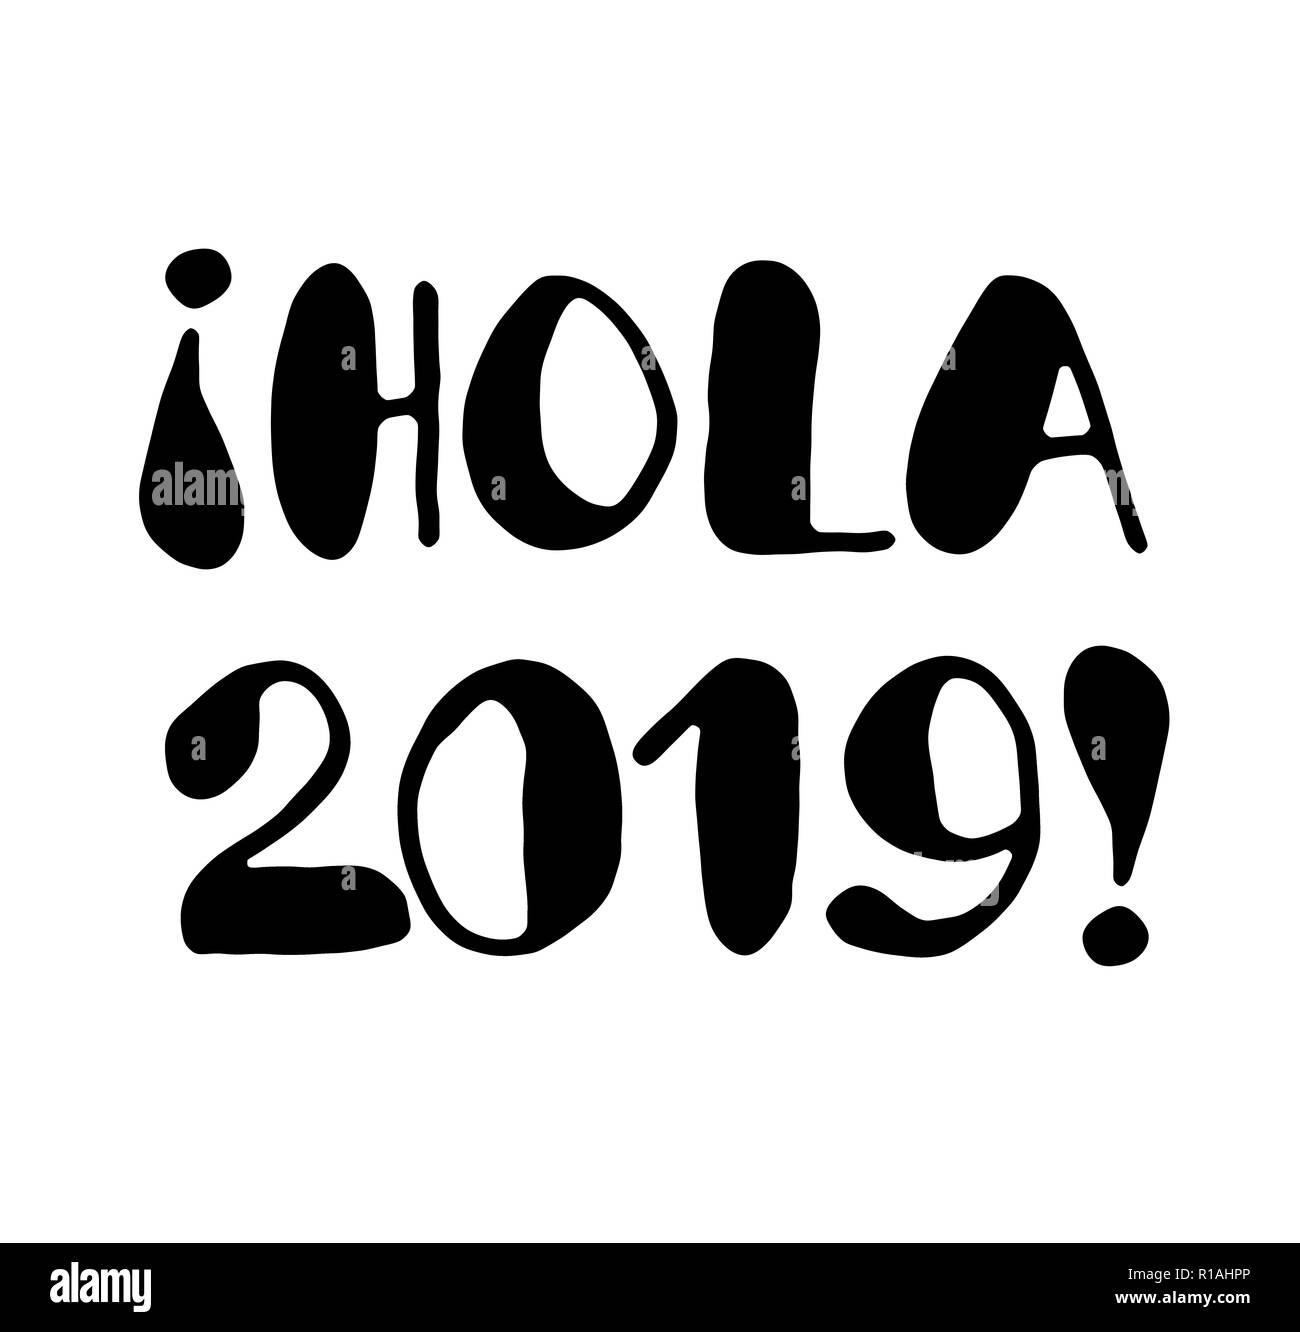 Hola 2019! - Modern calligraphy, lettering. (Hola is Hello in Spanish) Stock Photo